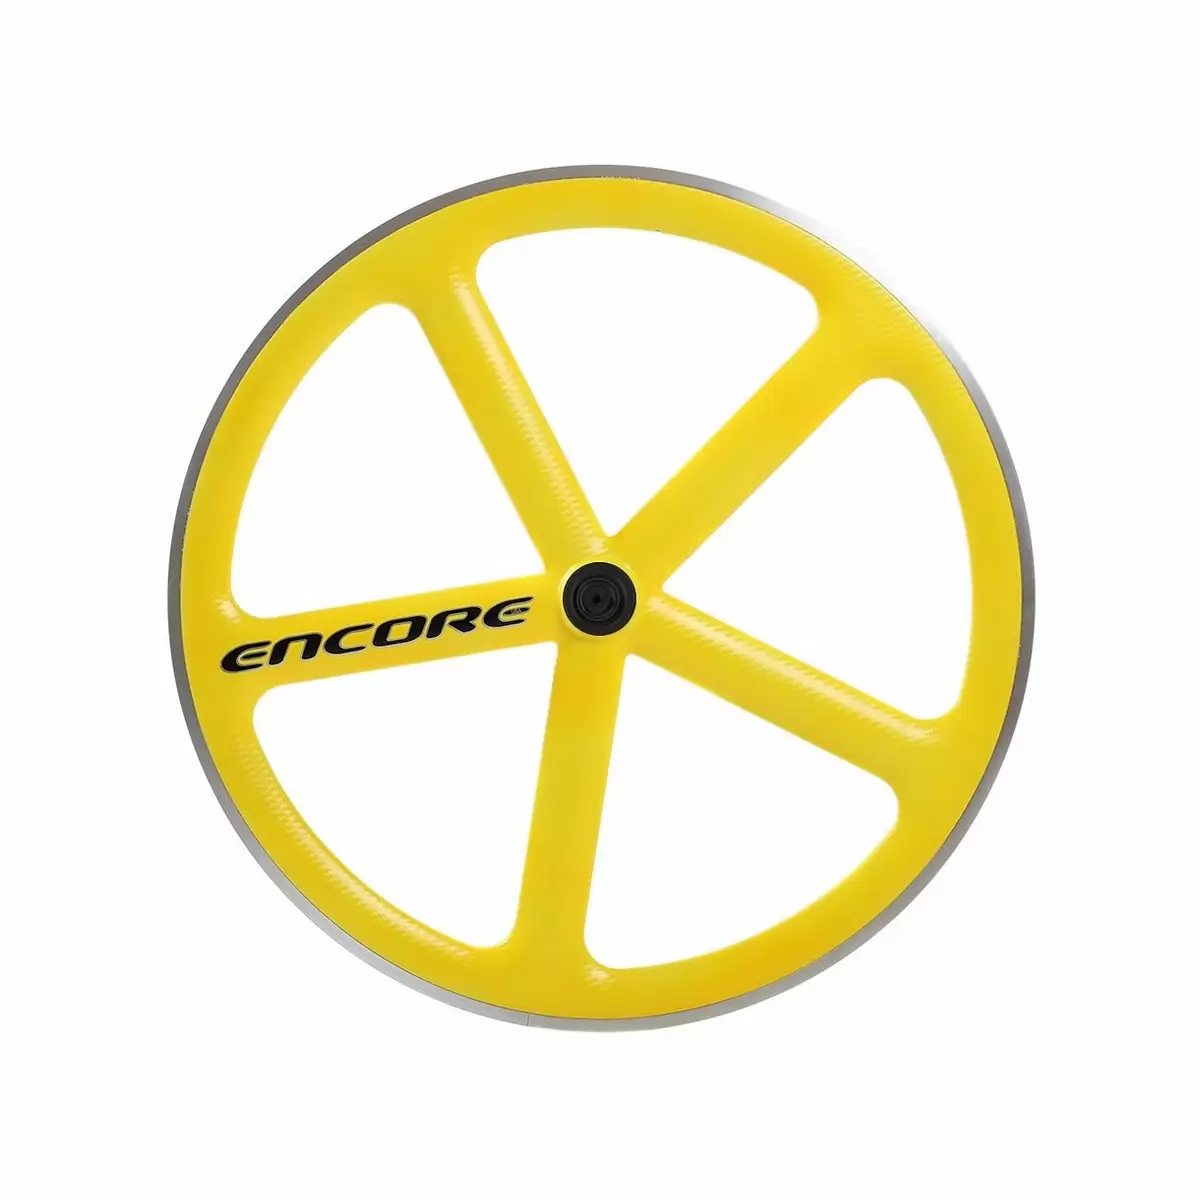 roue arrière 700c track 5 rayons carbone tissage jaune fluo msw - image